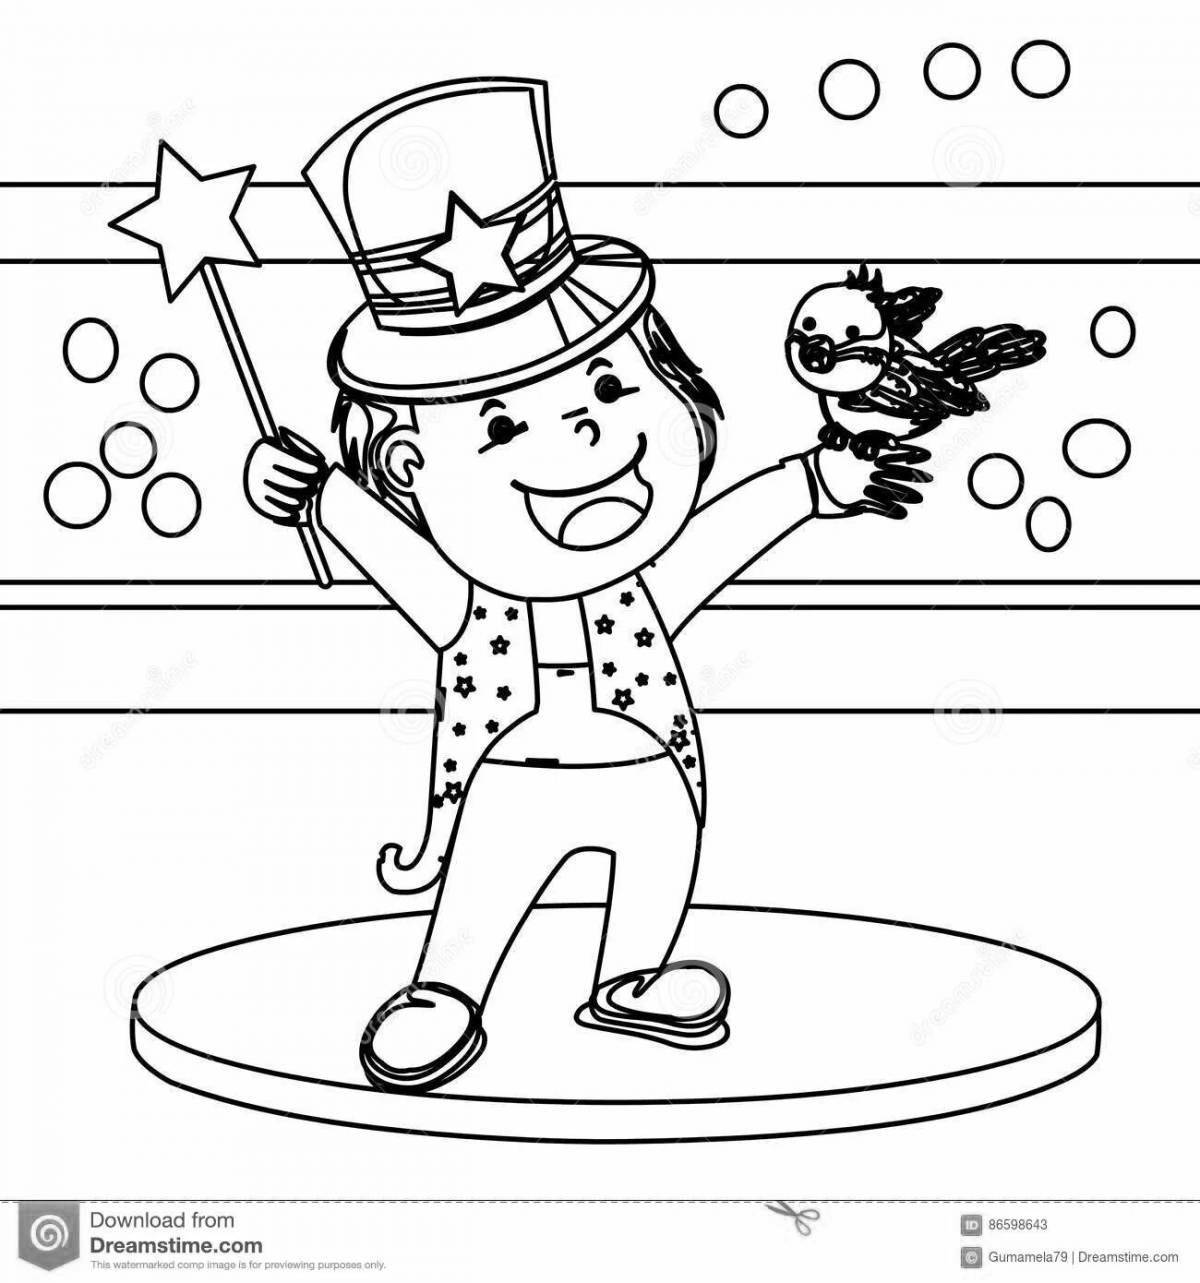 Grand funky uncle mokus coloring book